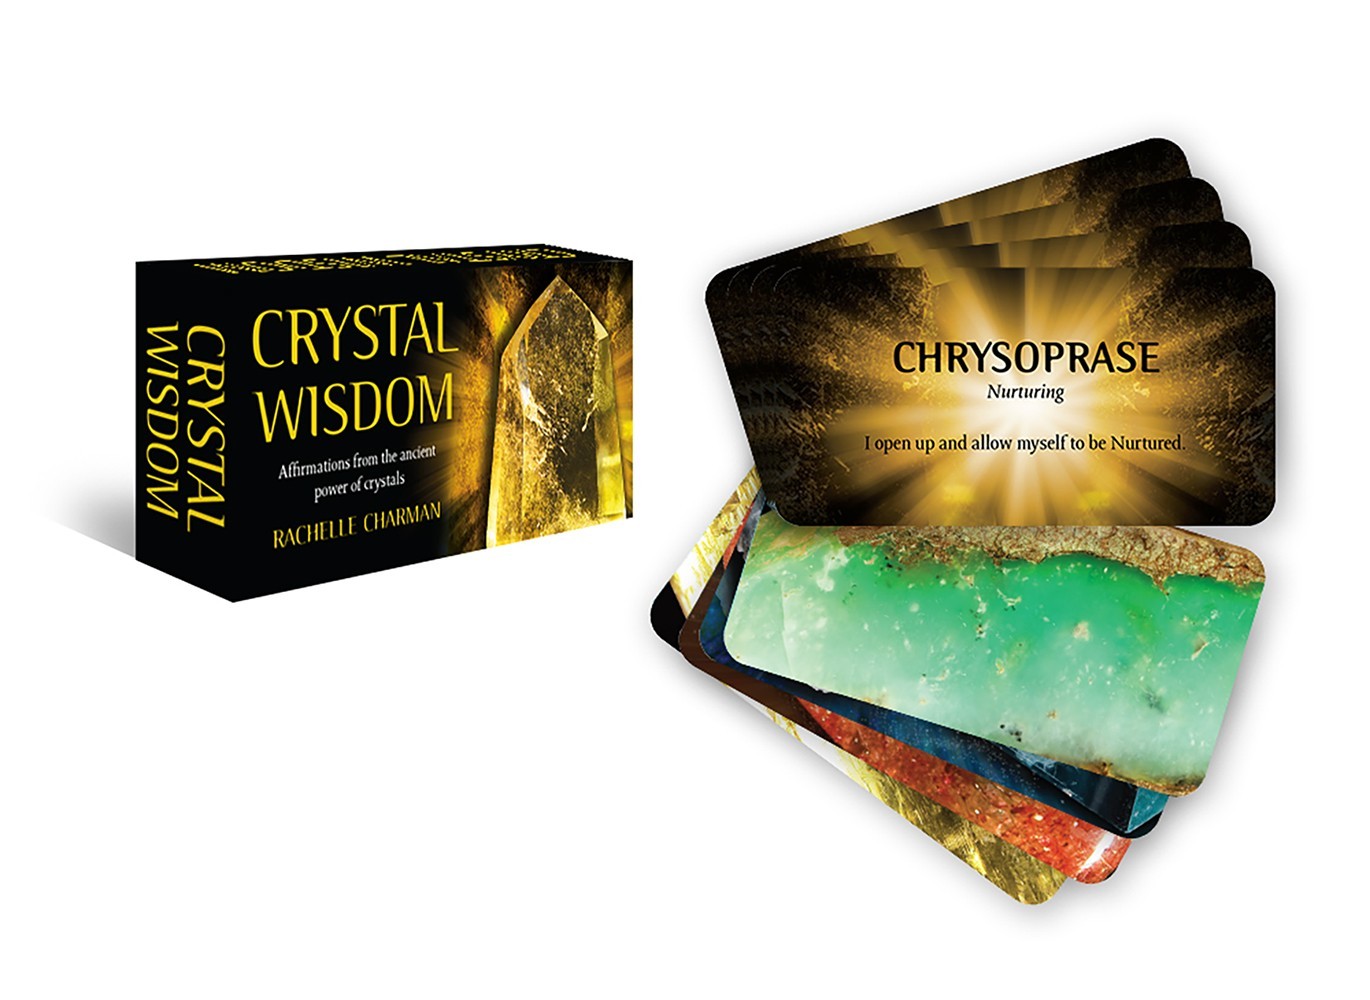 Crystal Wisdom view of box and cards